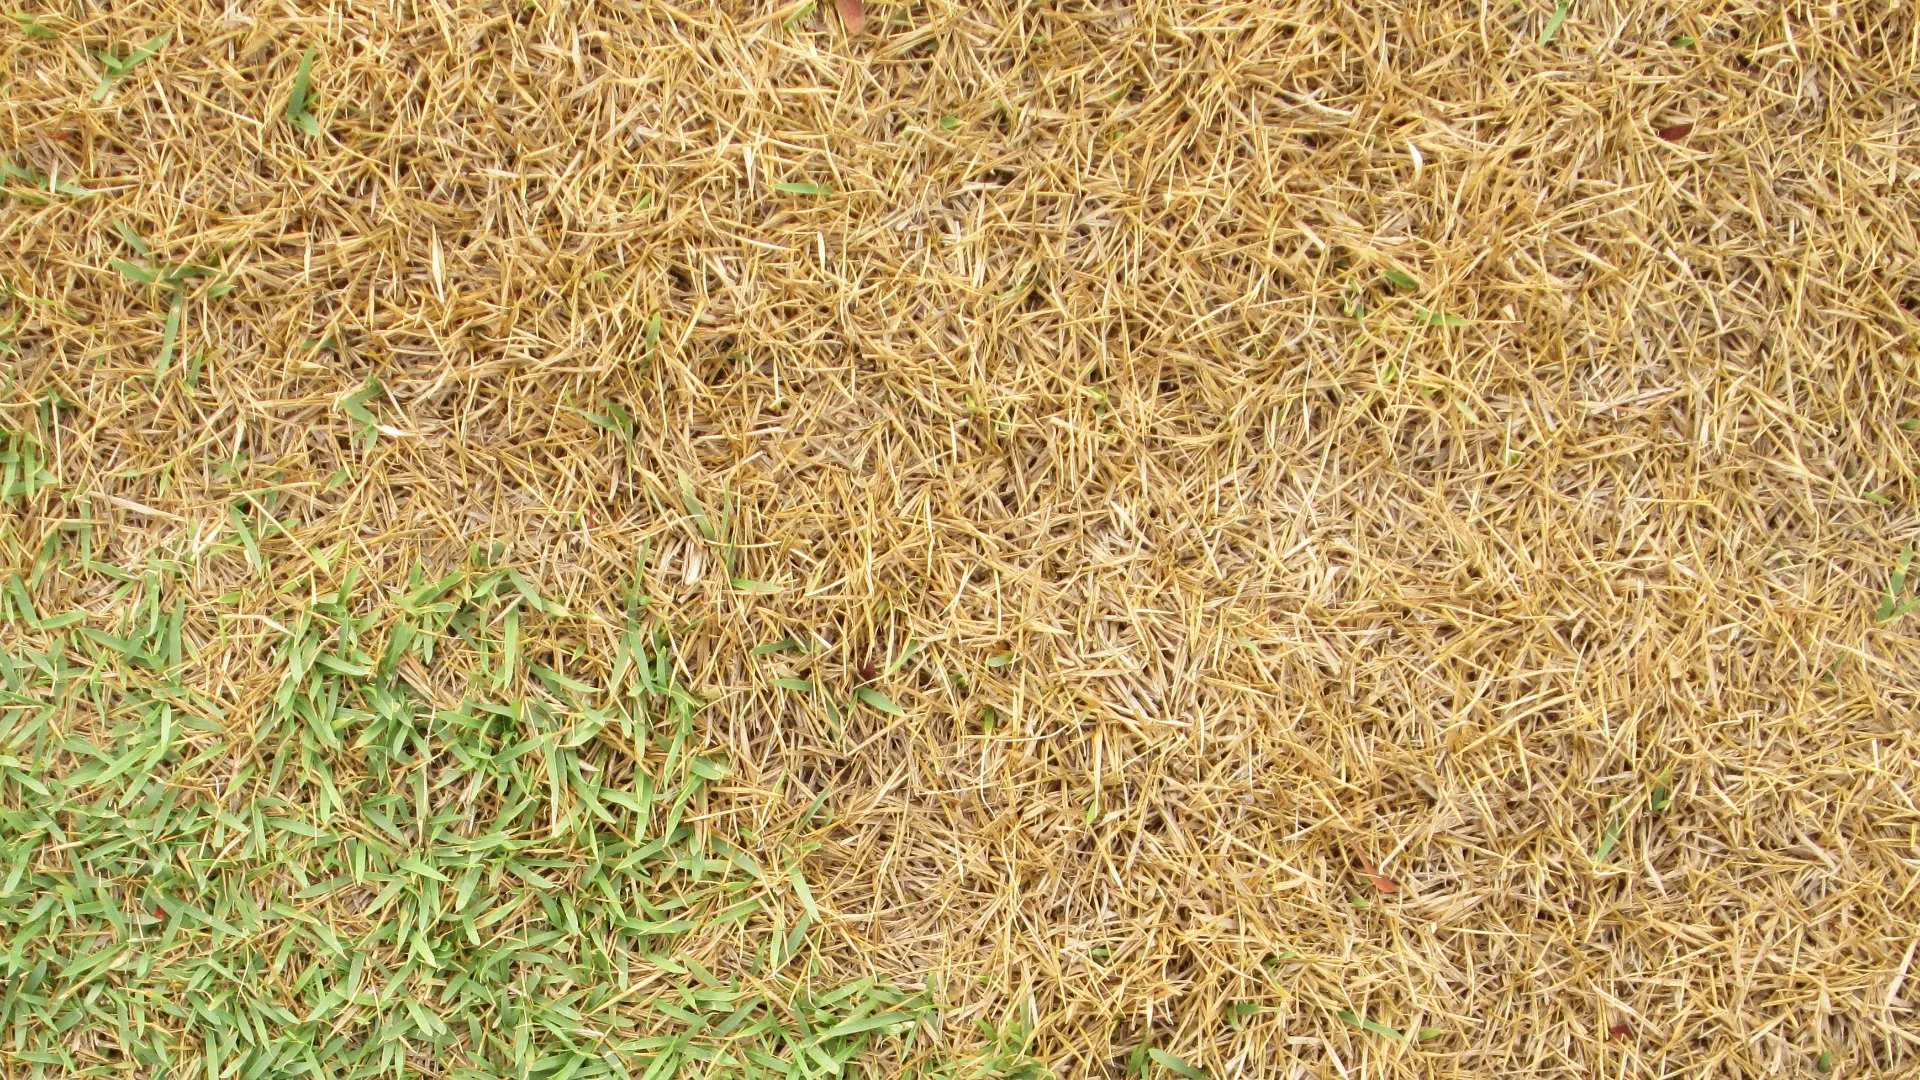 What Lawn Diseases Commonly Infect Grasses in Tennessee?